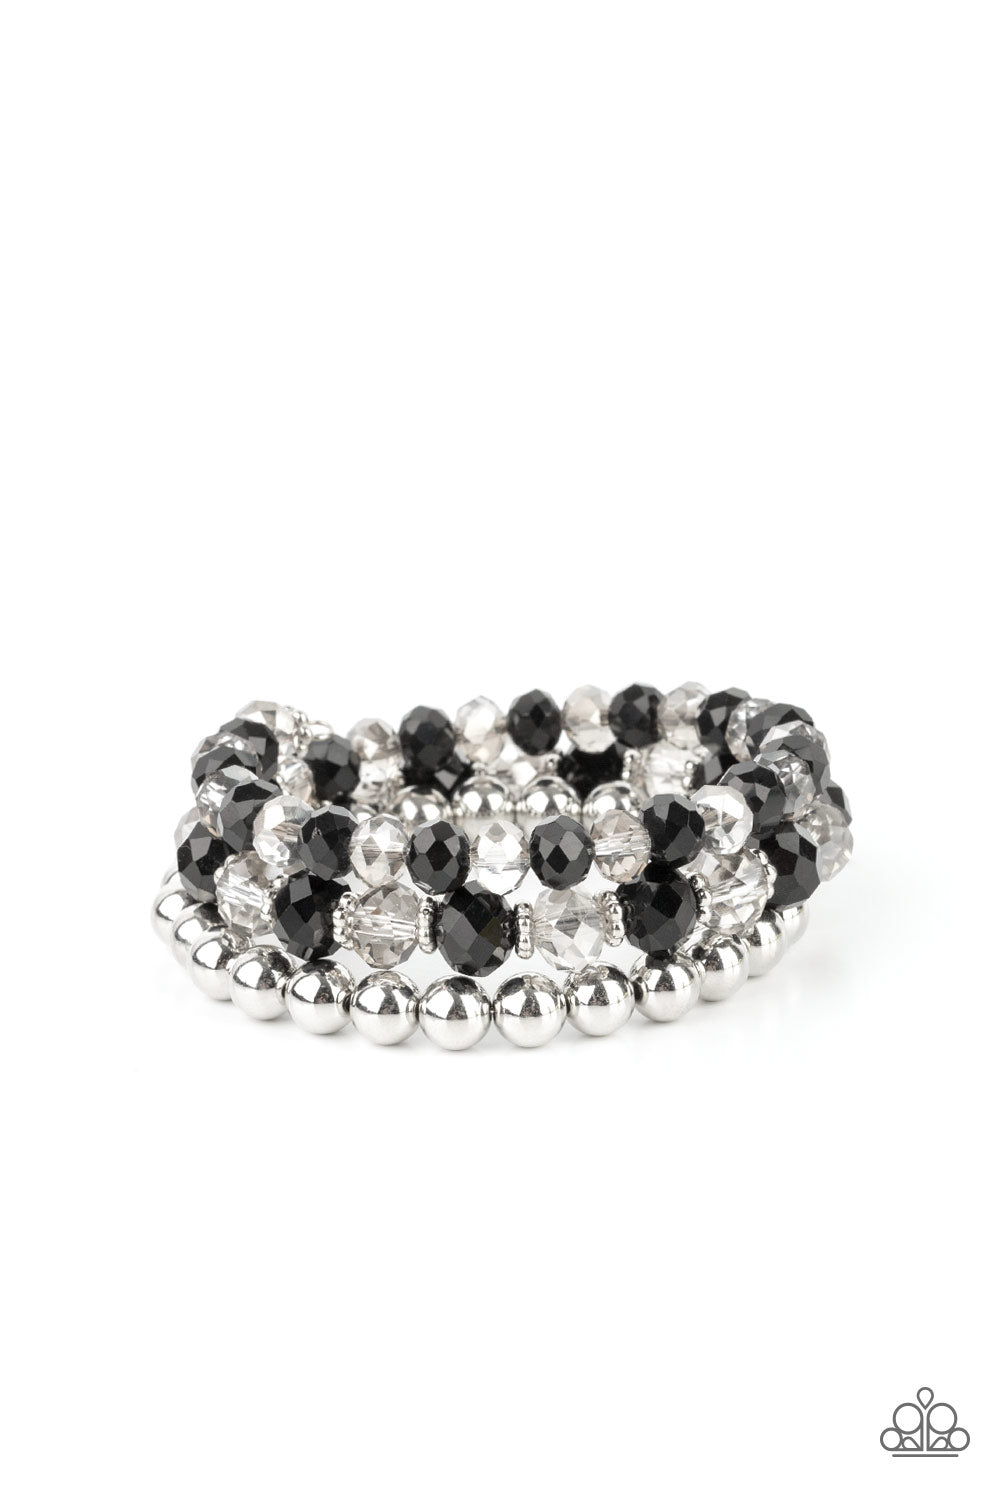 Gimme Gimme Black Bracelet - Paparazzi Accessories  Sections of shiny silver beads and an alternating pattern of smoky and glittery black rhinestone gems gradually increase in size along a coiled wire, creating a jaw-dropping infinity wrap bracelet around the wrist.  All Paparazzi Accessories are lead free and nickel free!  Sold as one individual bracelet.